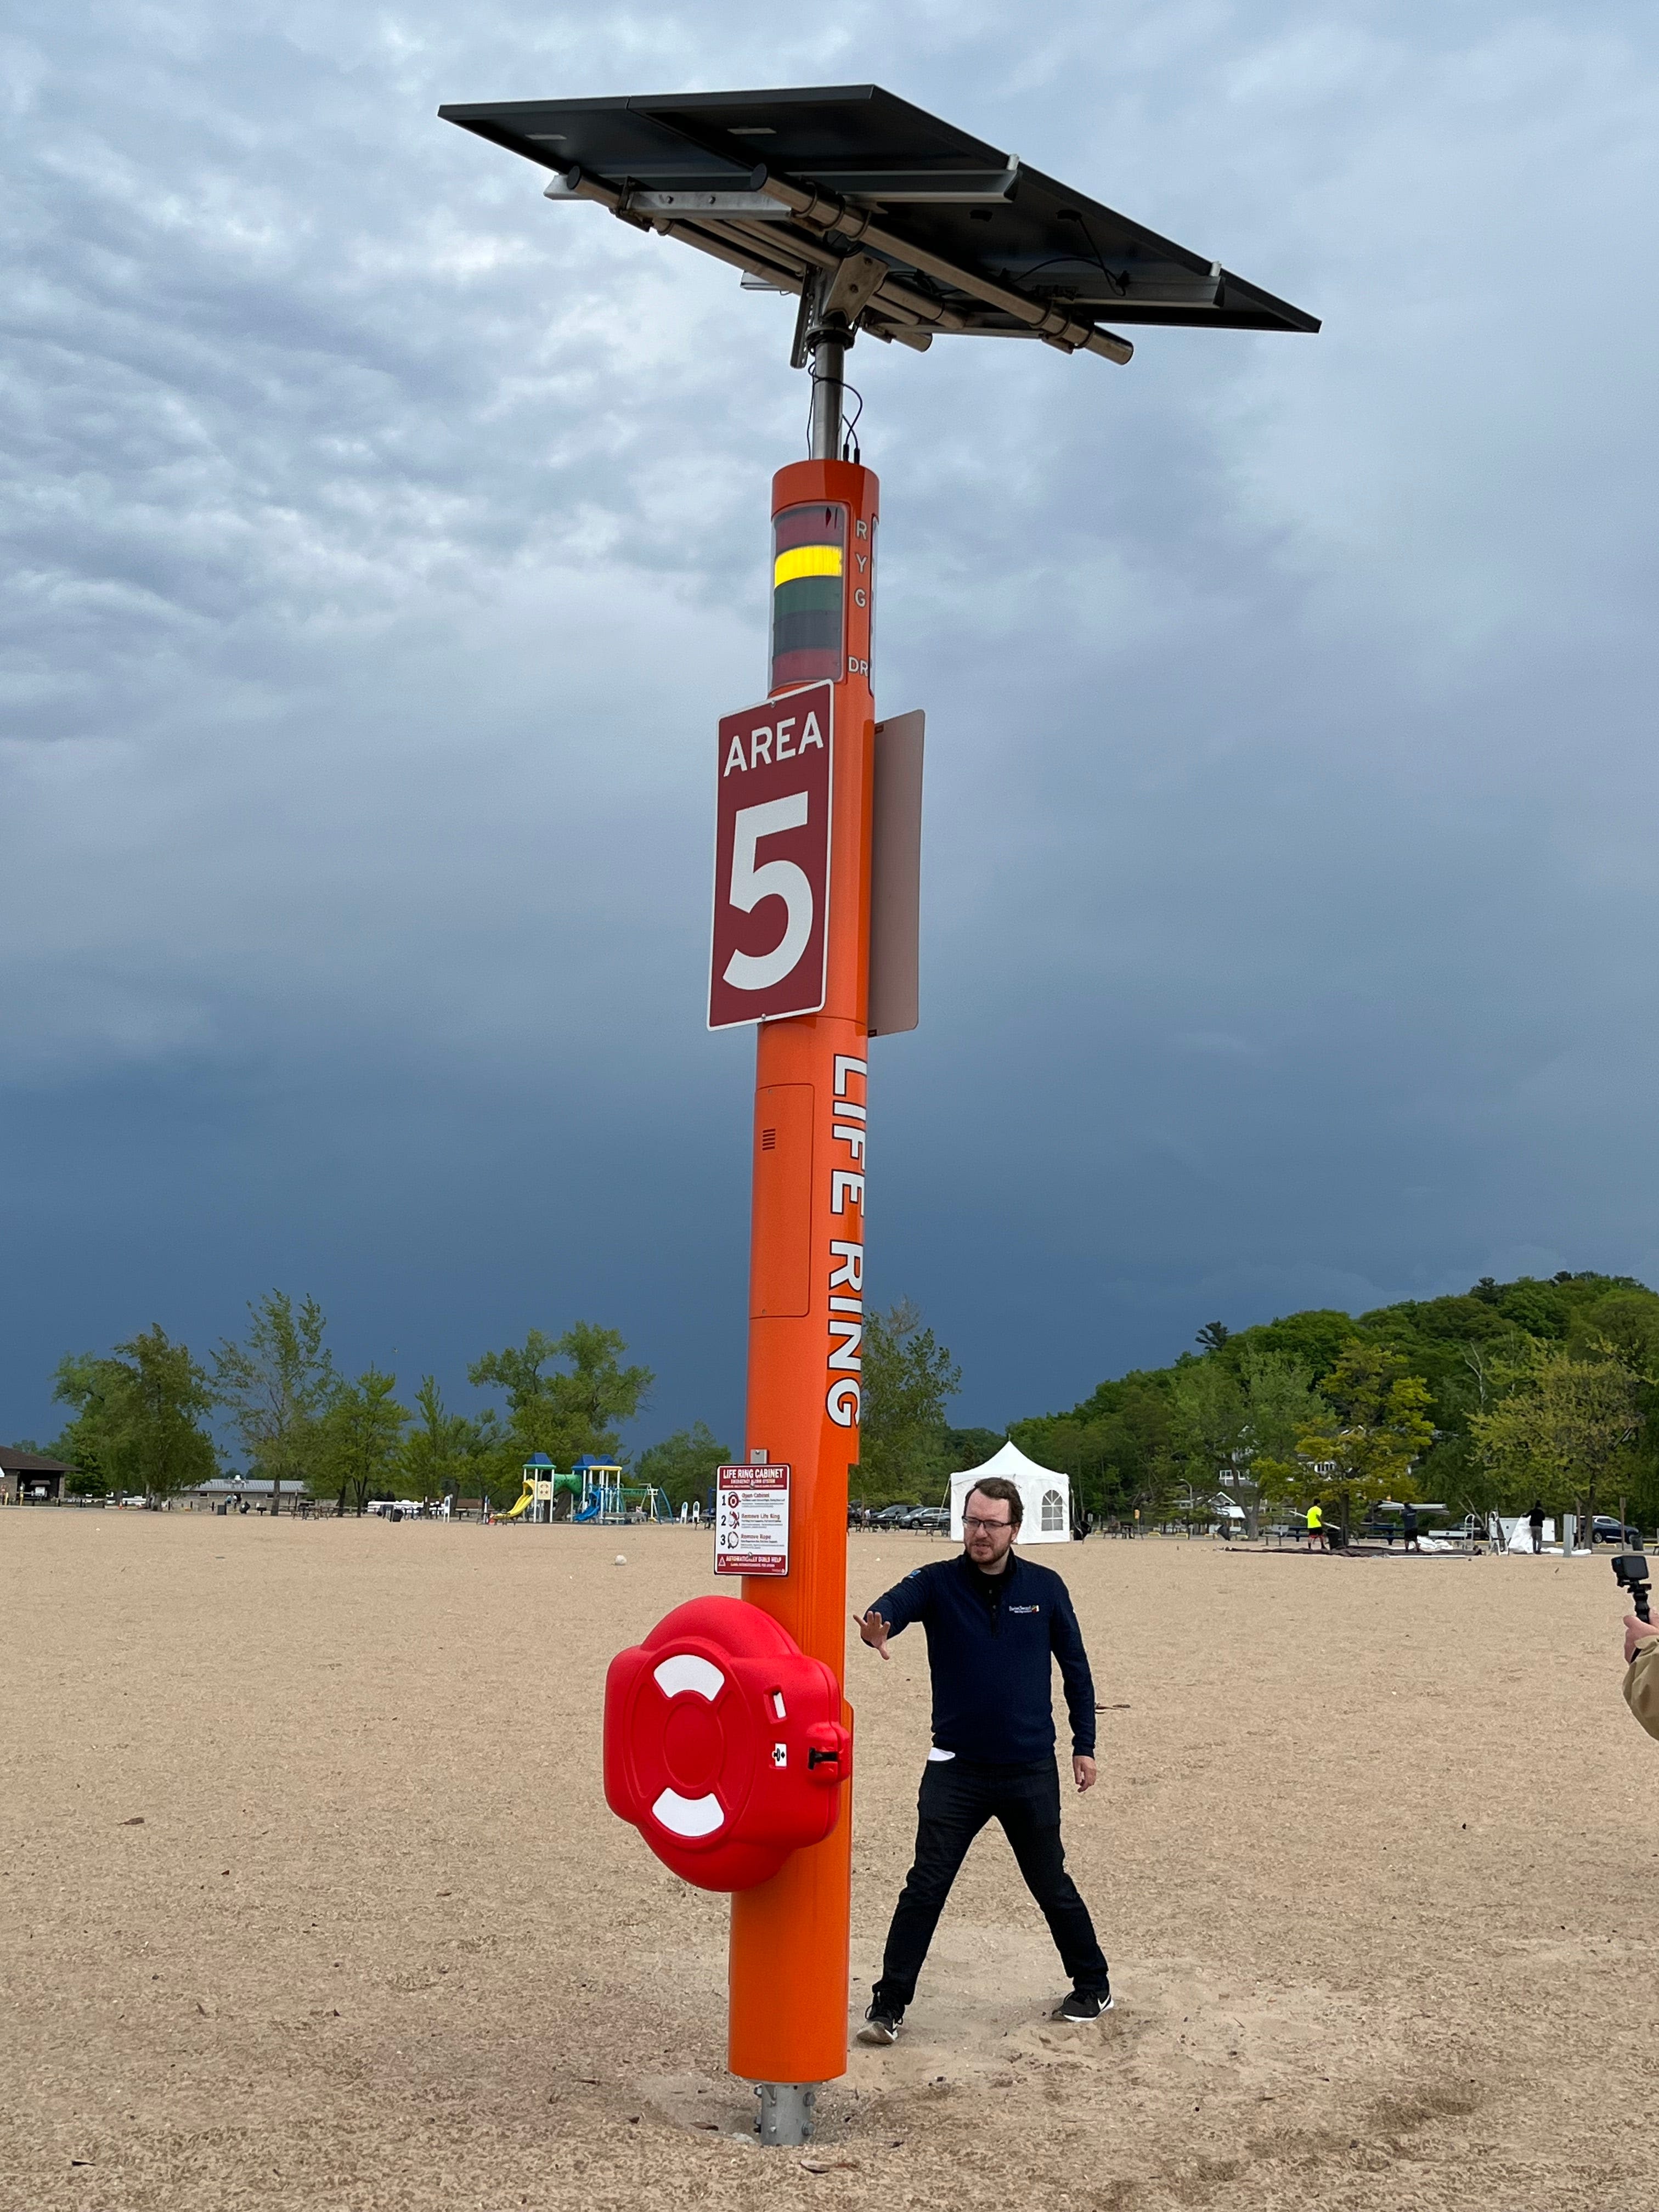 Smart towers latest in effort to make Lake Michigan a safer place to swim